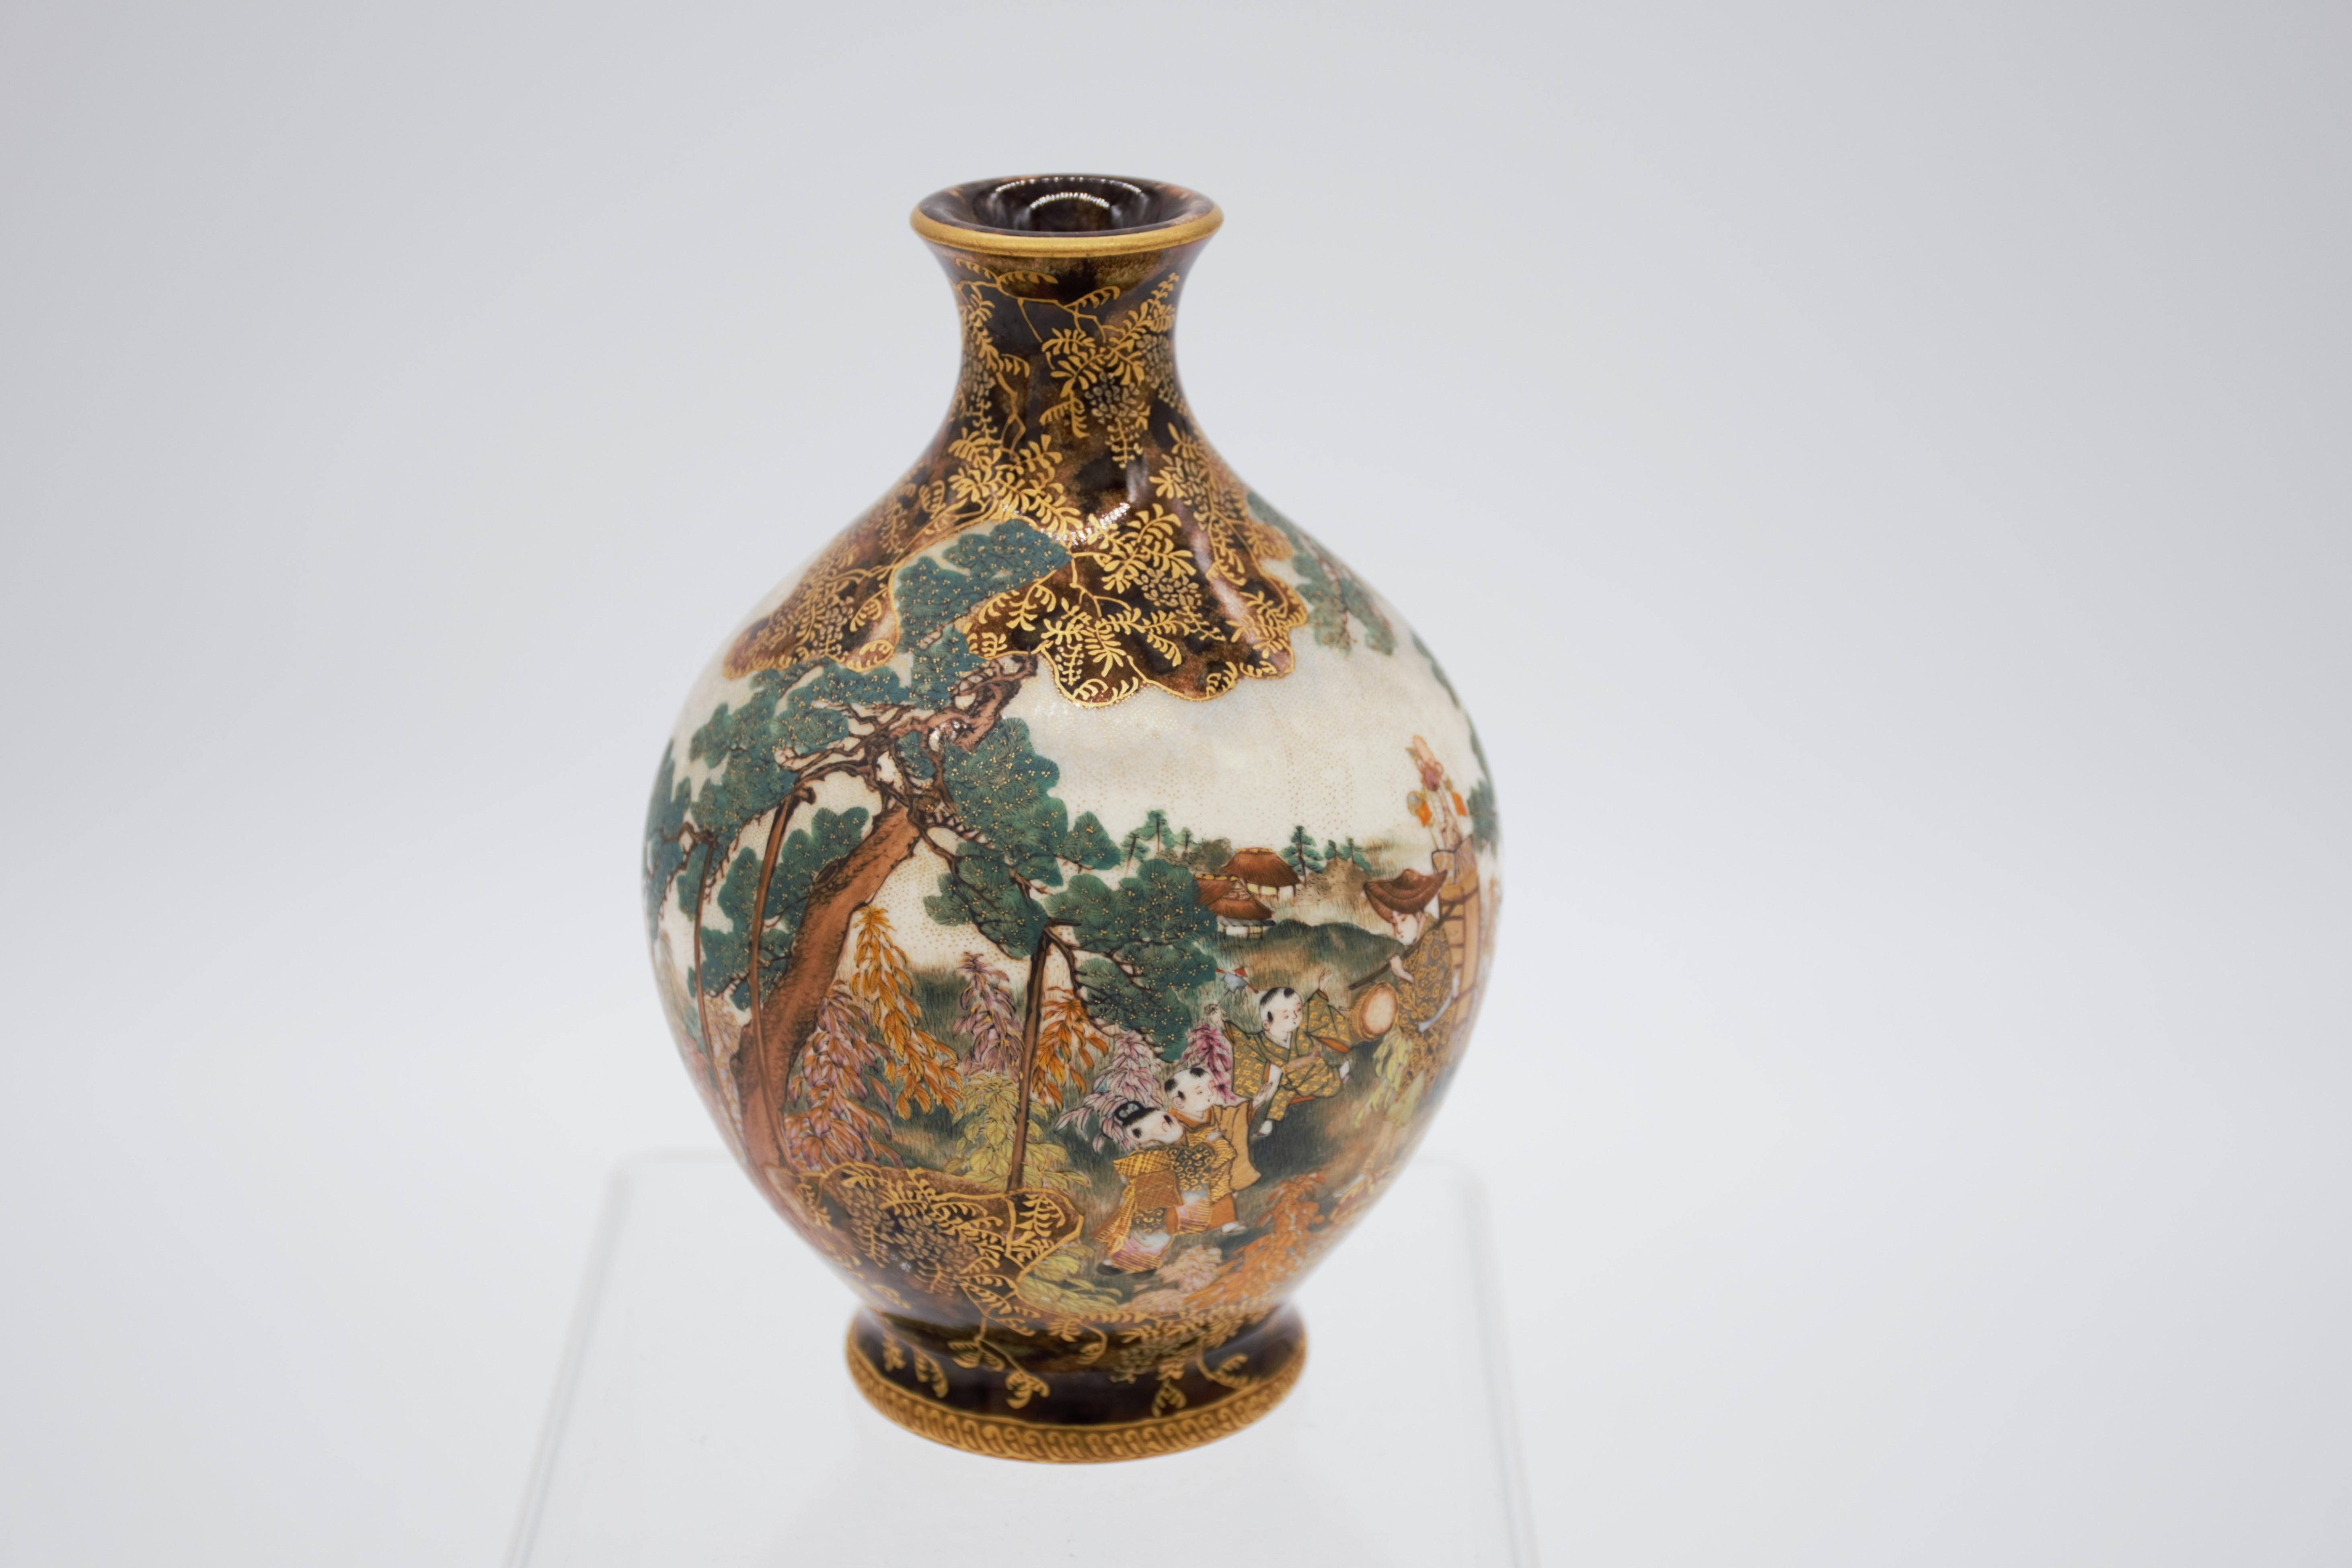 the body of this small marvelous vase is painted with a scene of a puppet show vendor with his wood backpack, on top of the backpack there are toys and dolls, he is surrounded with a group of 6 children, and on the background you can see a